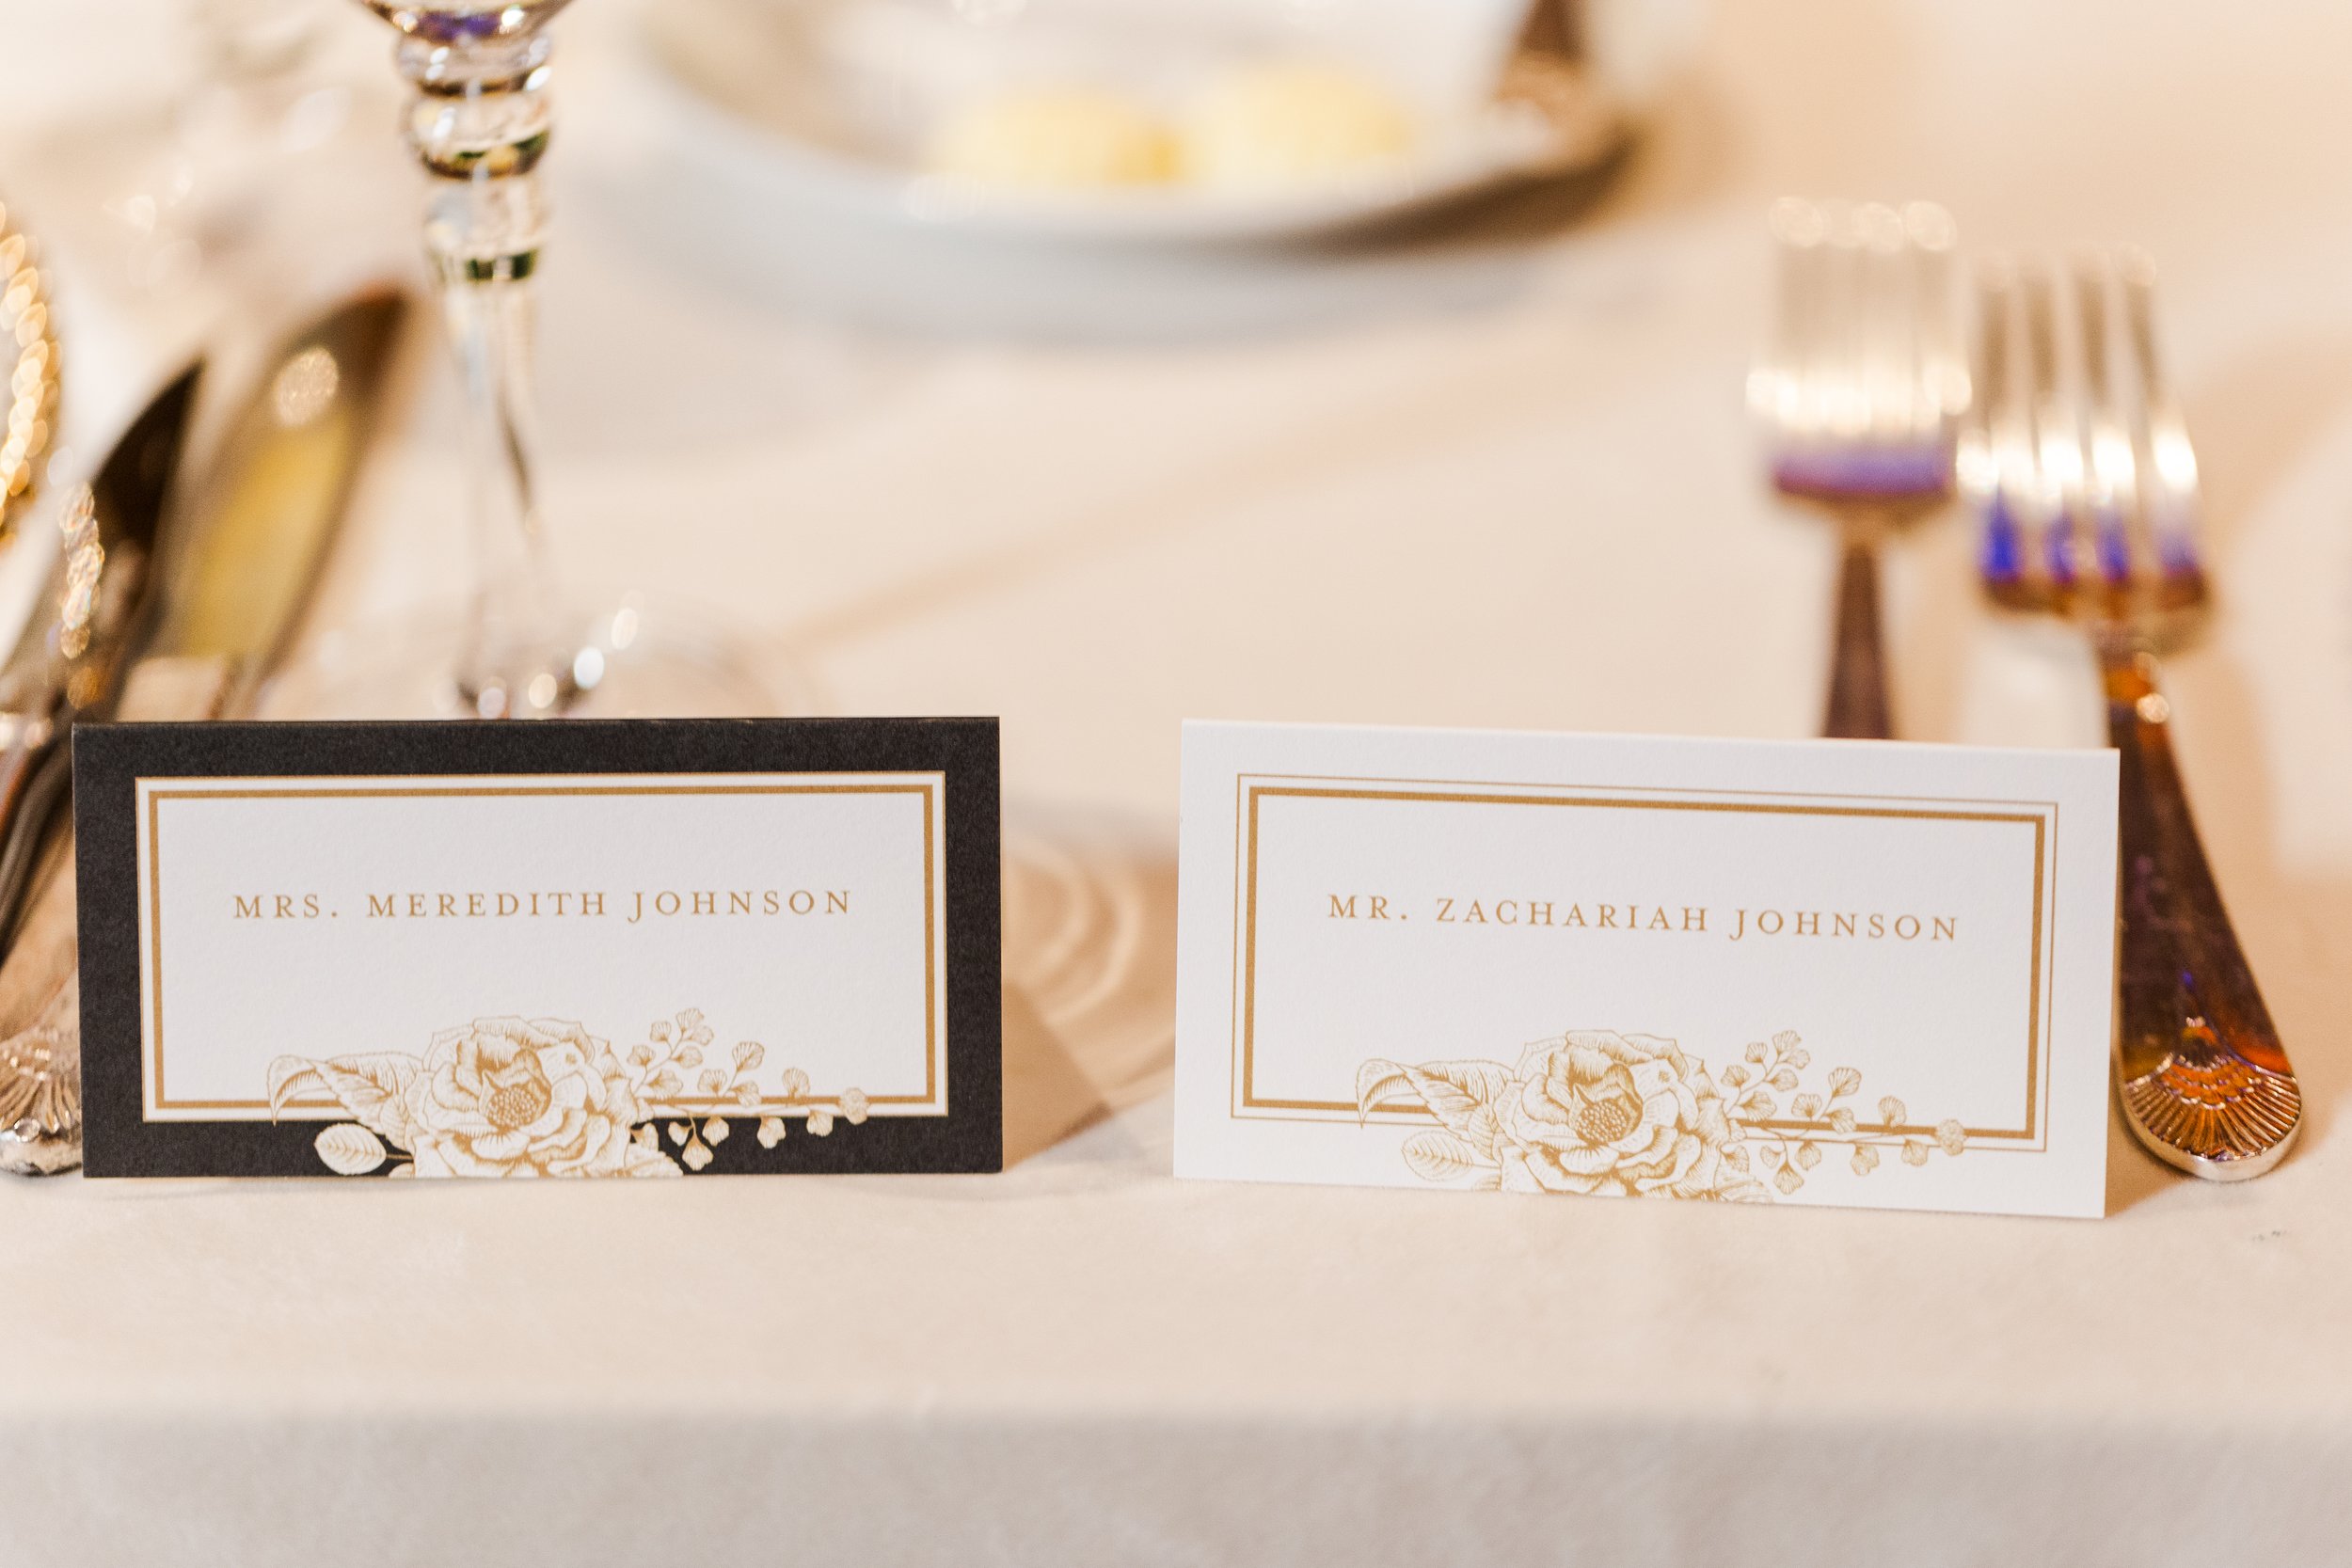 wedding place cards with gold and navy detail for cincinnati wedding